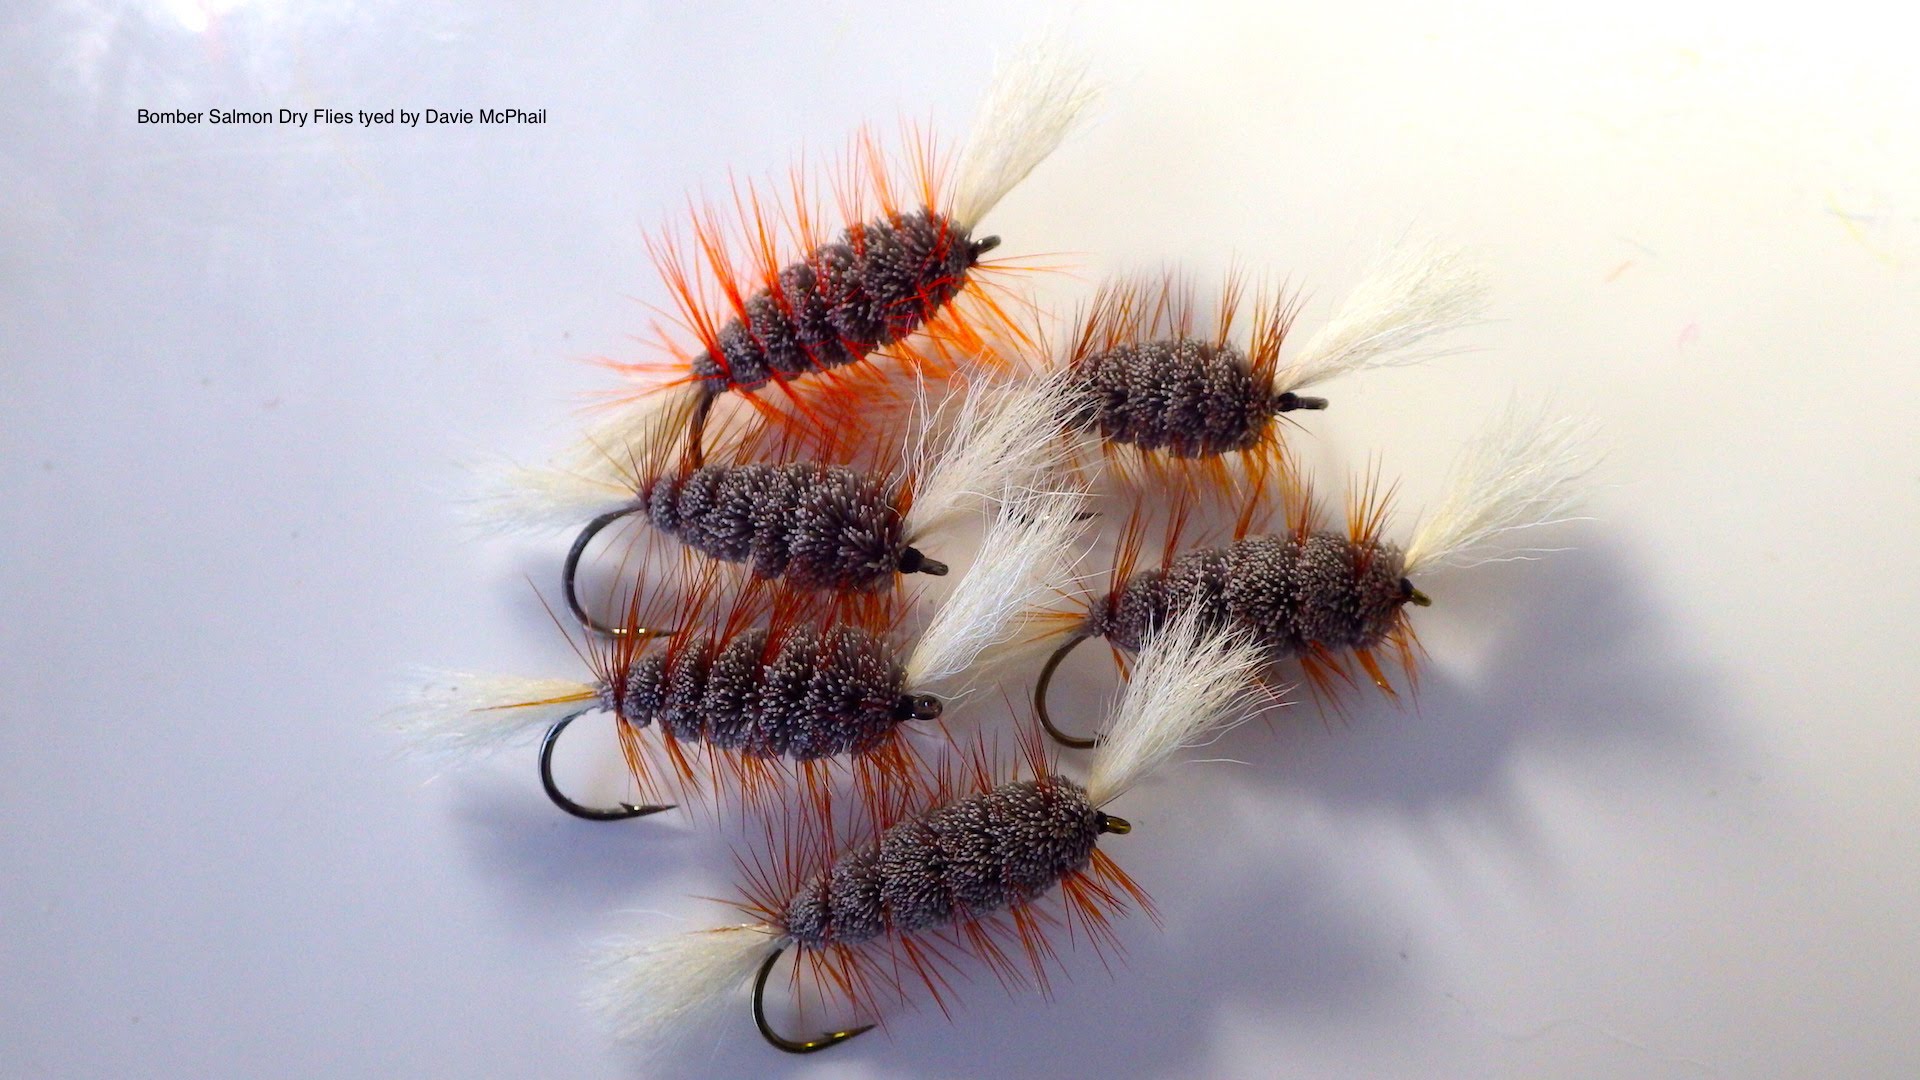 Tying a Bomber Salmon Dry Fly with Davie McPhail - YouTube